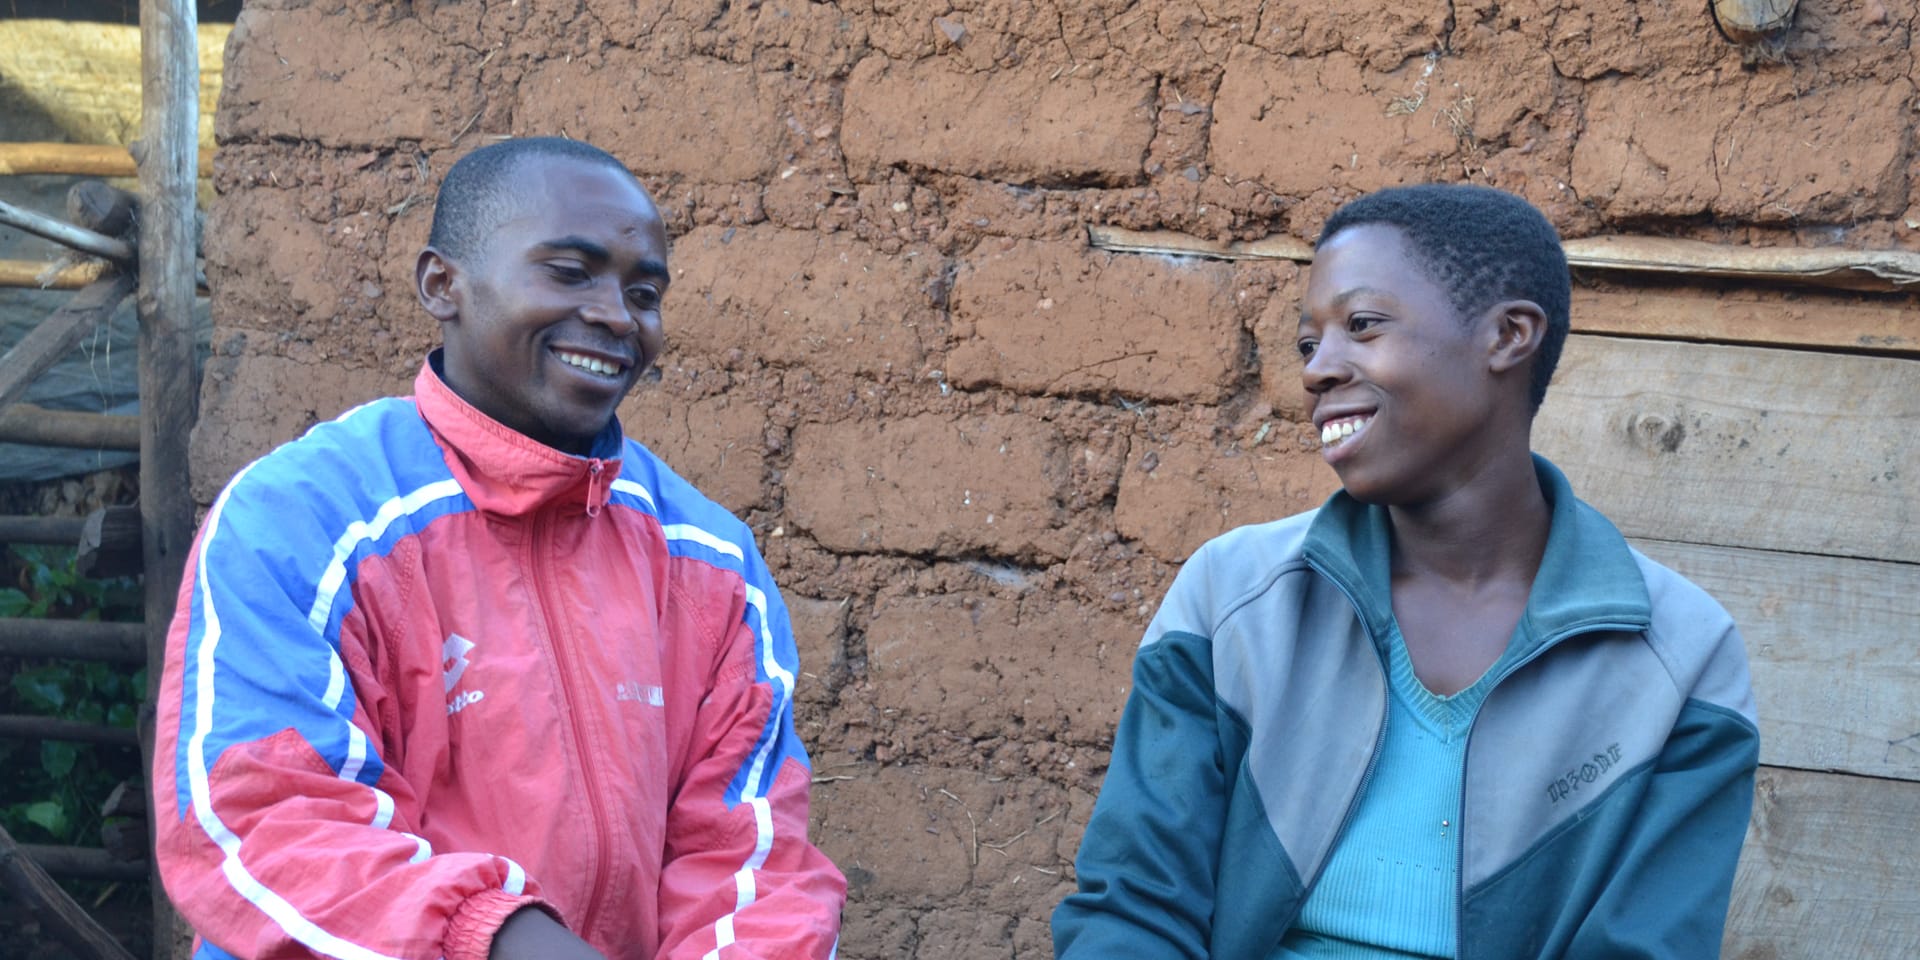 Image of two people sitting in front of a brick wall smiling as they talk.